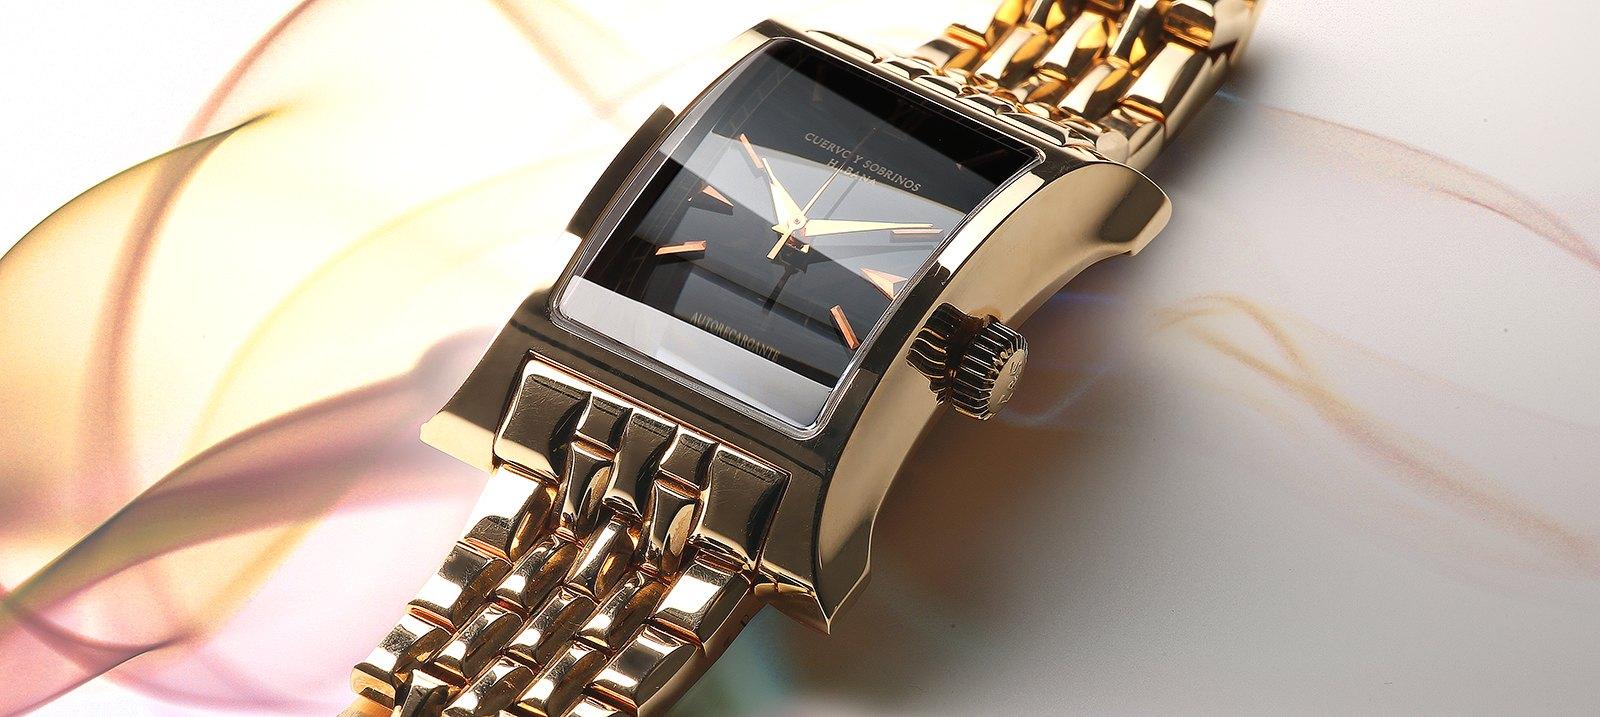 The Luxury Watches